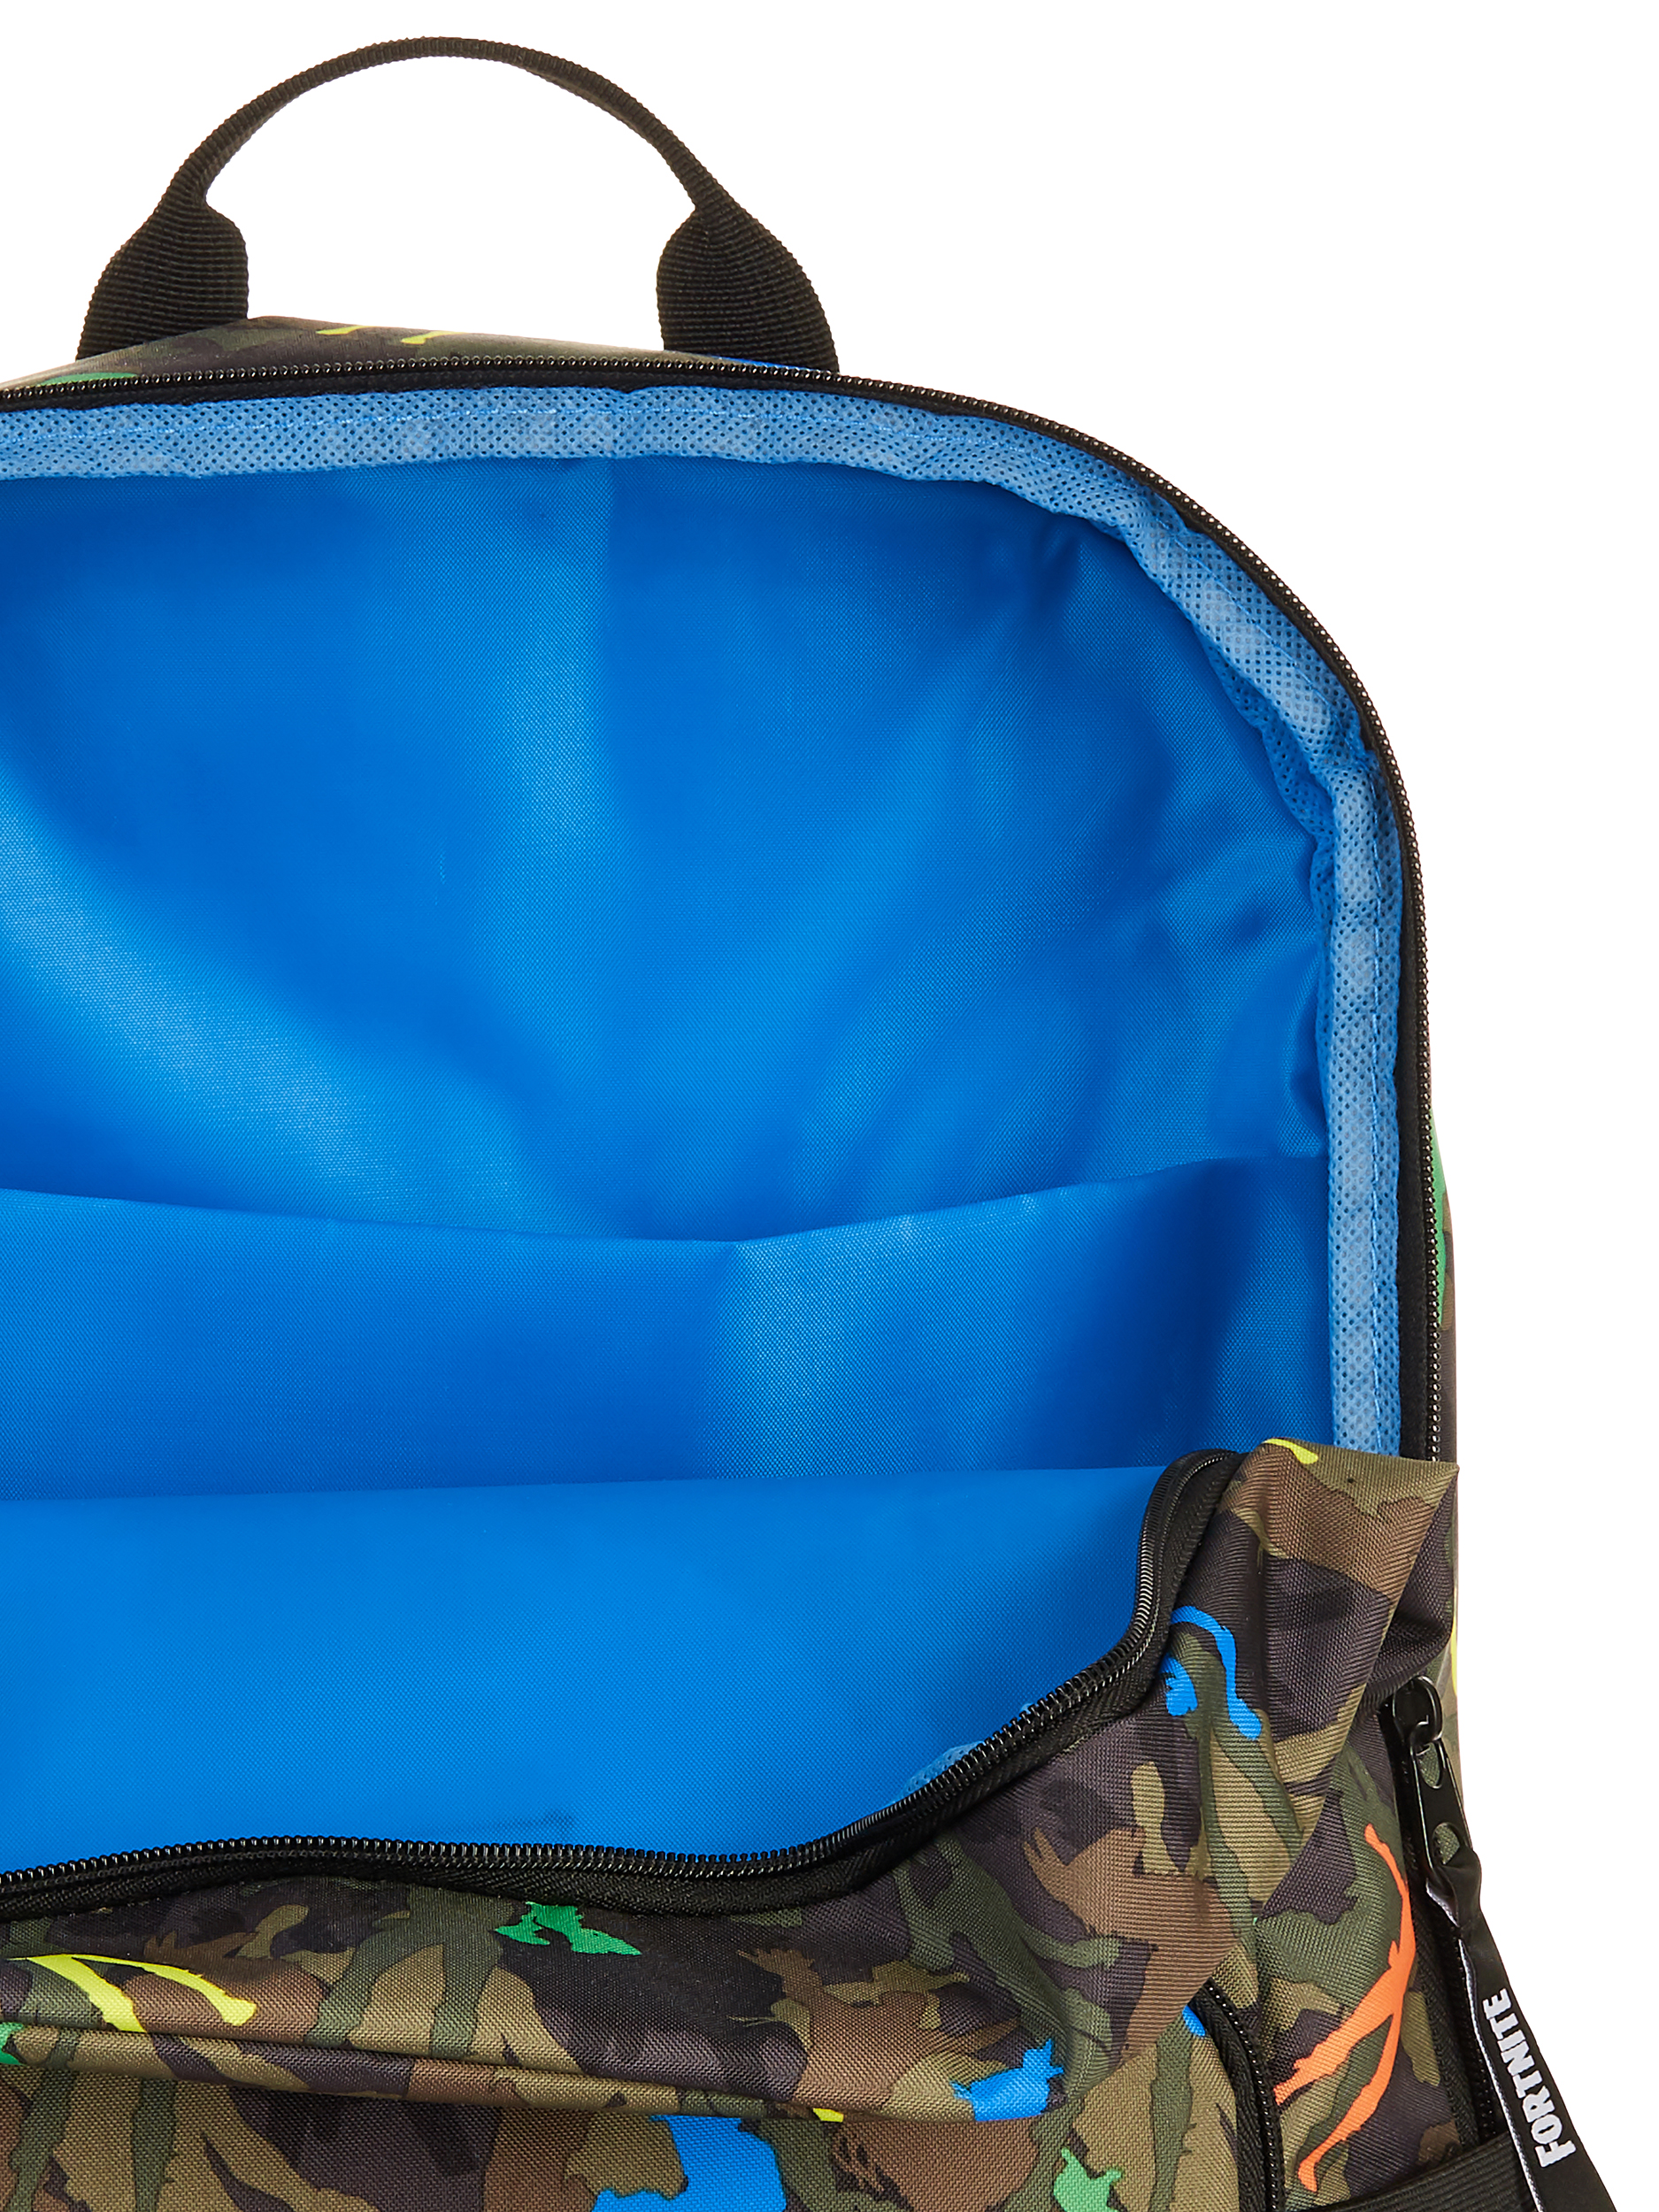 Fortnite Amplify Camo Dancing Silhouette Backpack - image 4 of 4